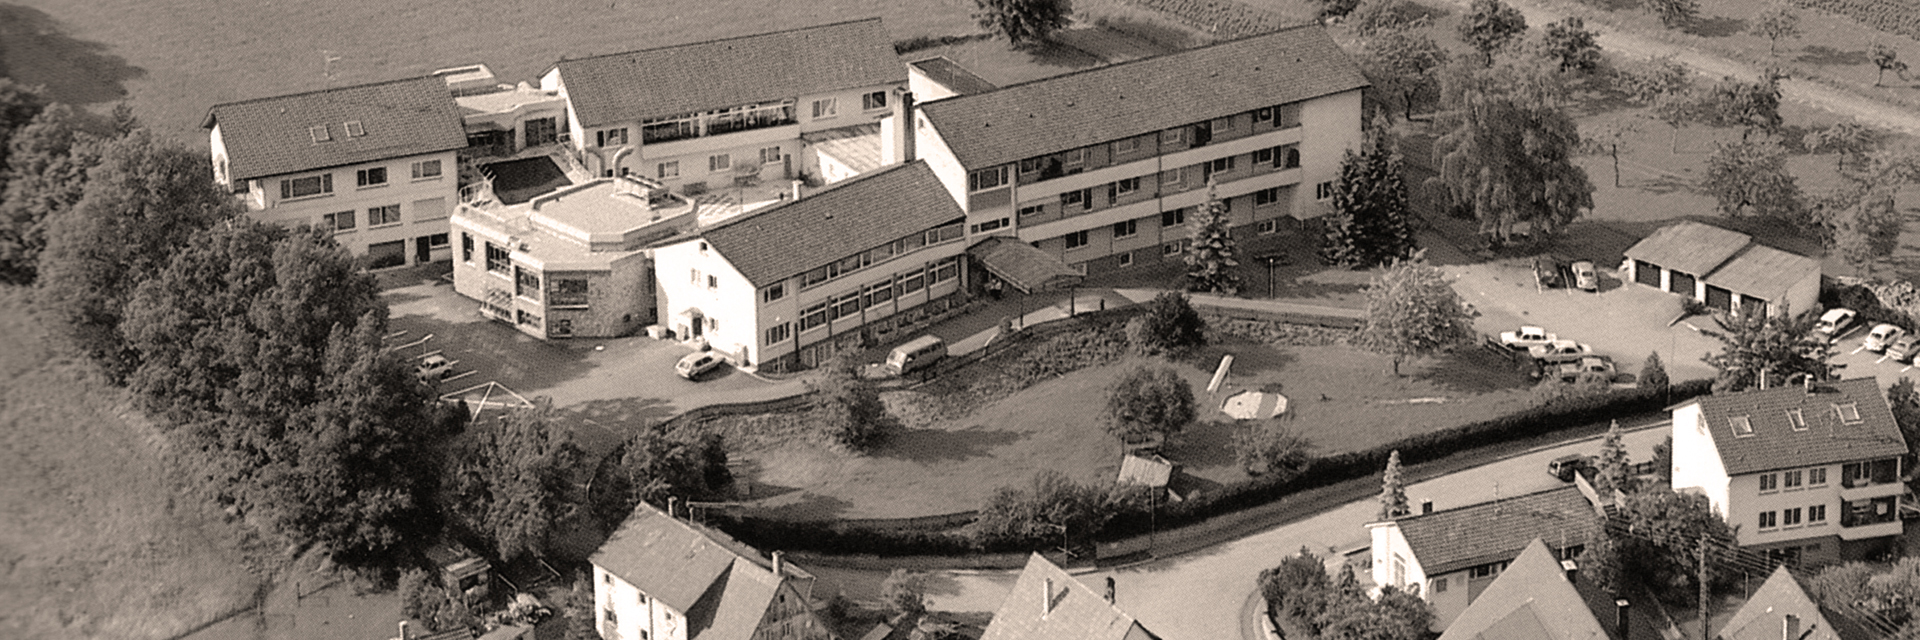 Picture: Aerial view of the children's hospital in the seventies